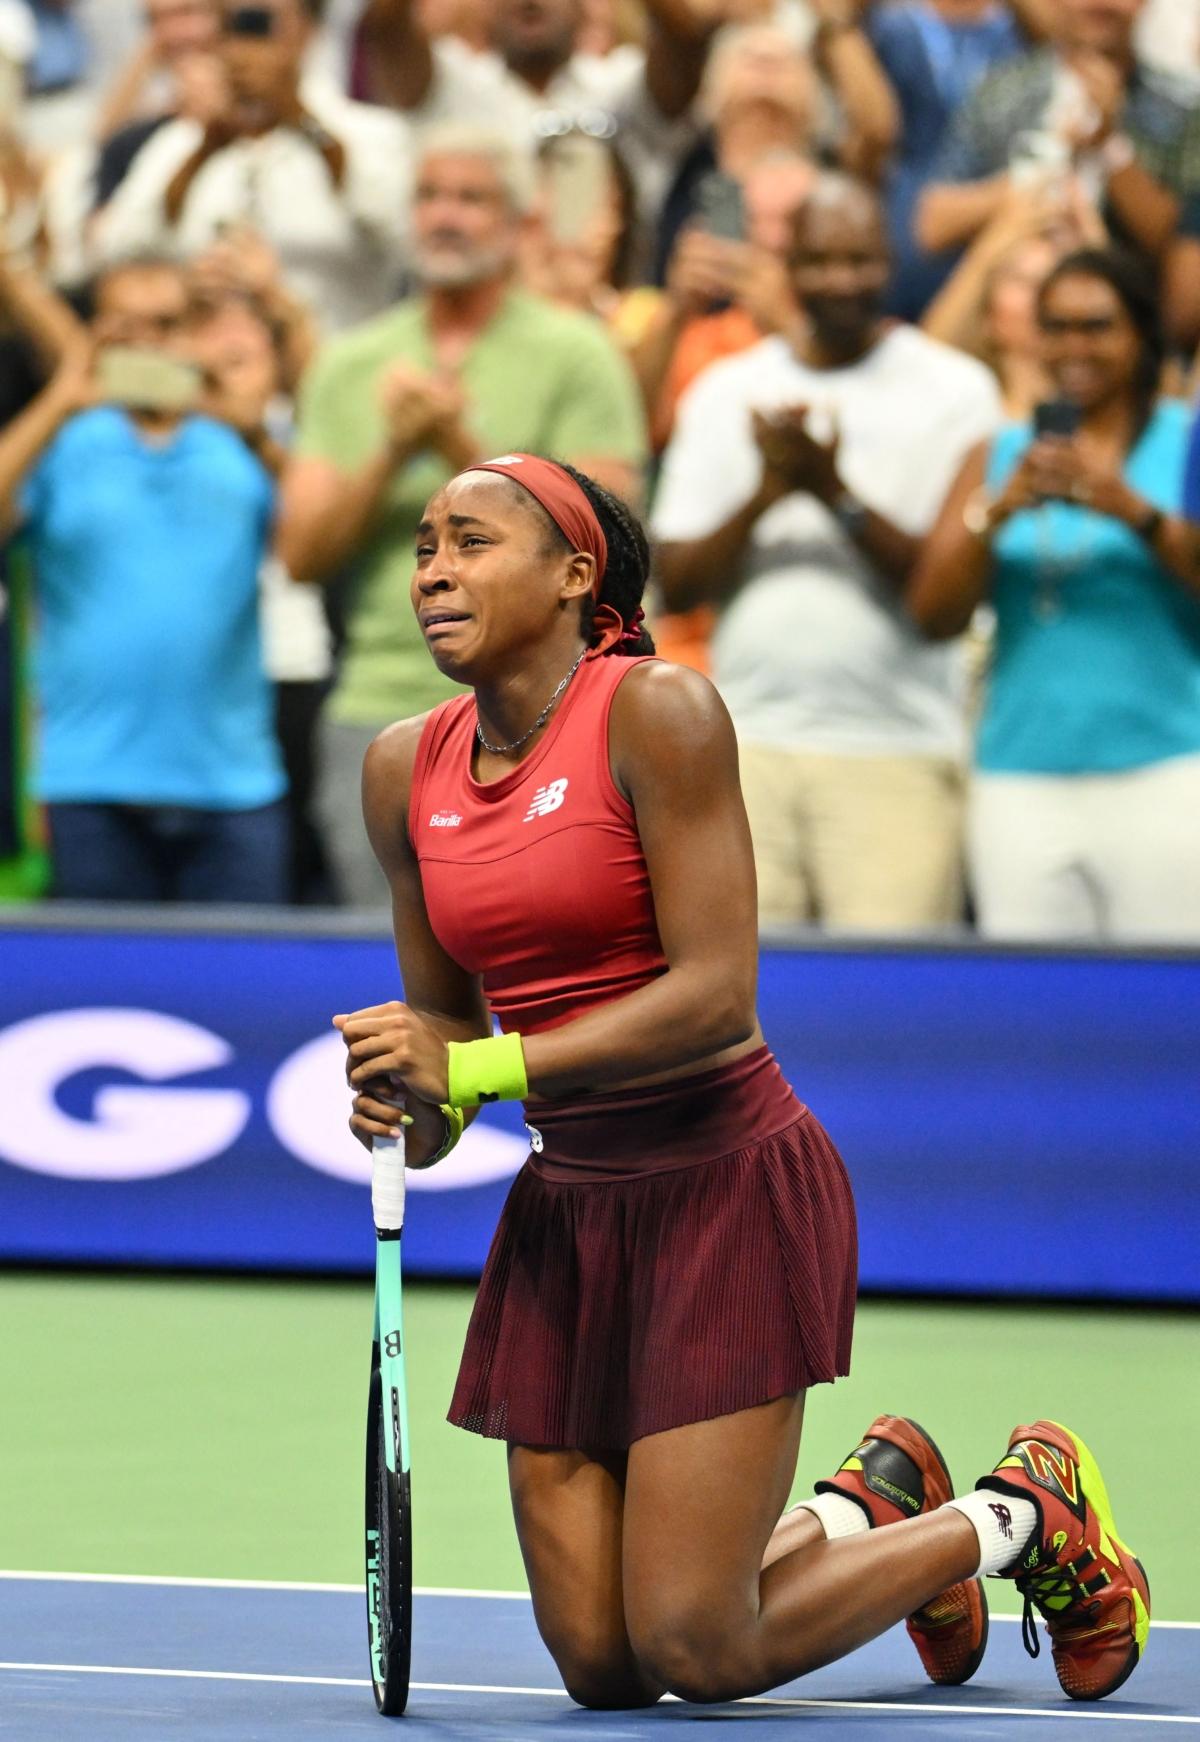 Coco Gauff of the United States celebrates defeating Aryna Sabalenka of Belarus in the US Open tennis tournament women's singles final match at the USTA National Tennis Center in New York on Sept. 9, 2023. (Angela Weiss/AFP via Getty Images)